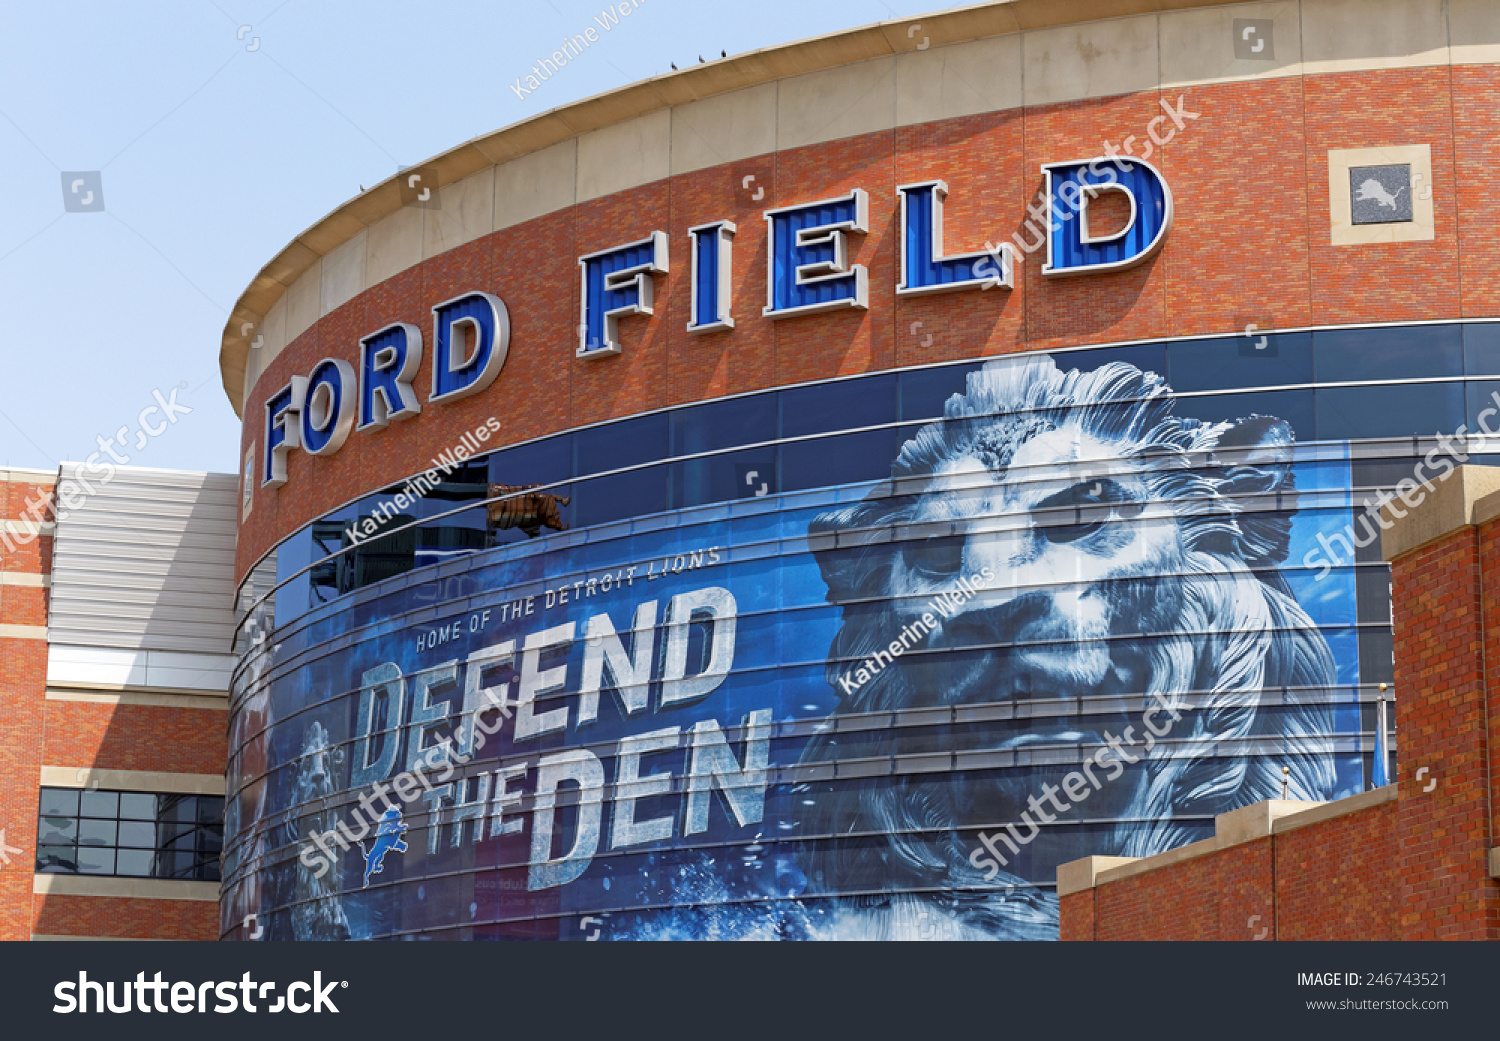 Ford field location detroit #9